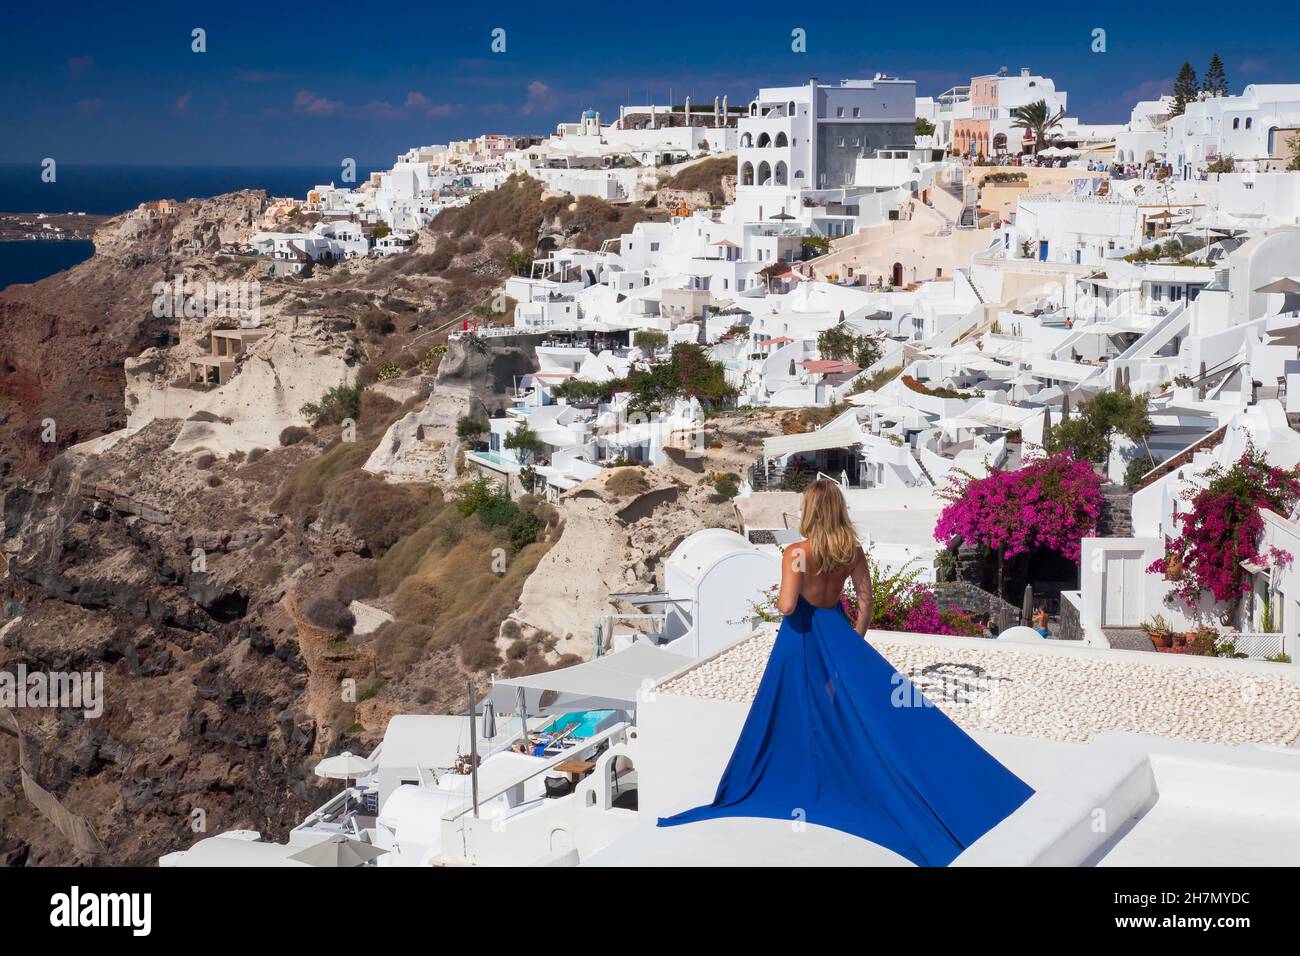 Woman in a blue dress looks over the place Imerovigli, Santorini, Cyclades, Greece Stock Photo